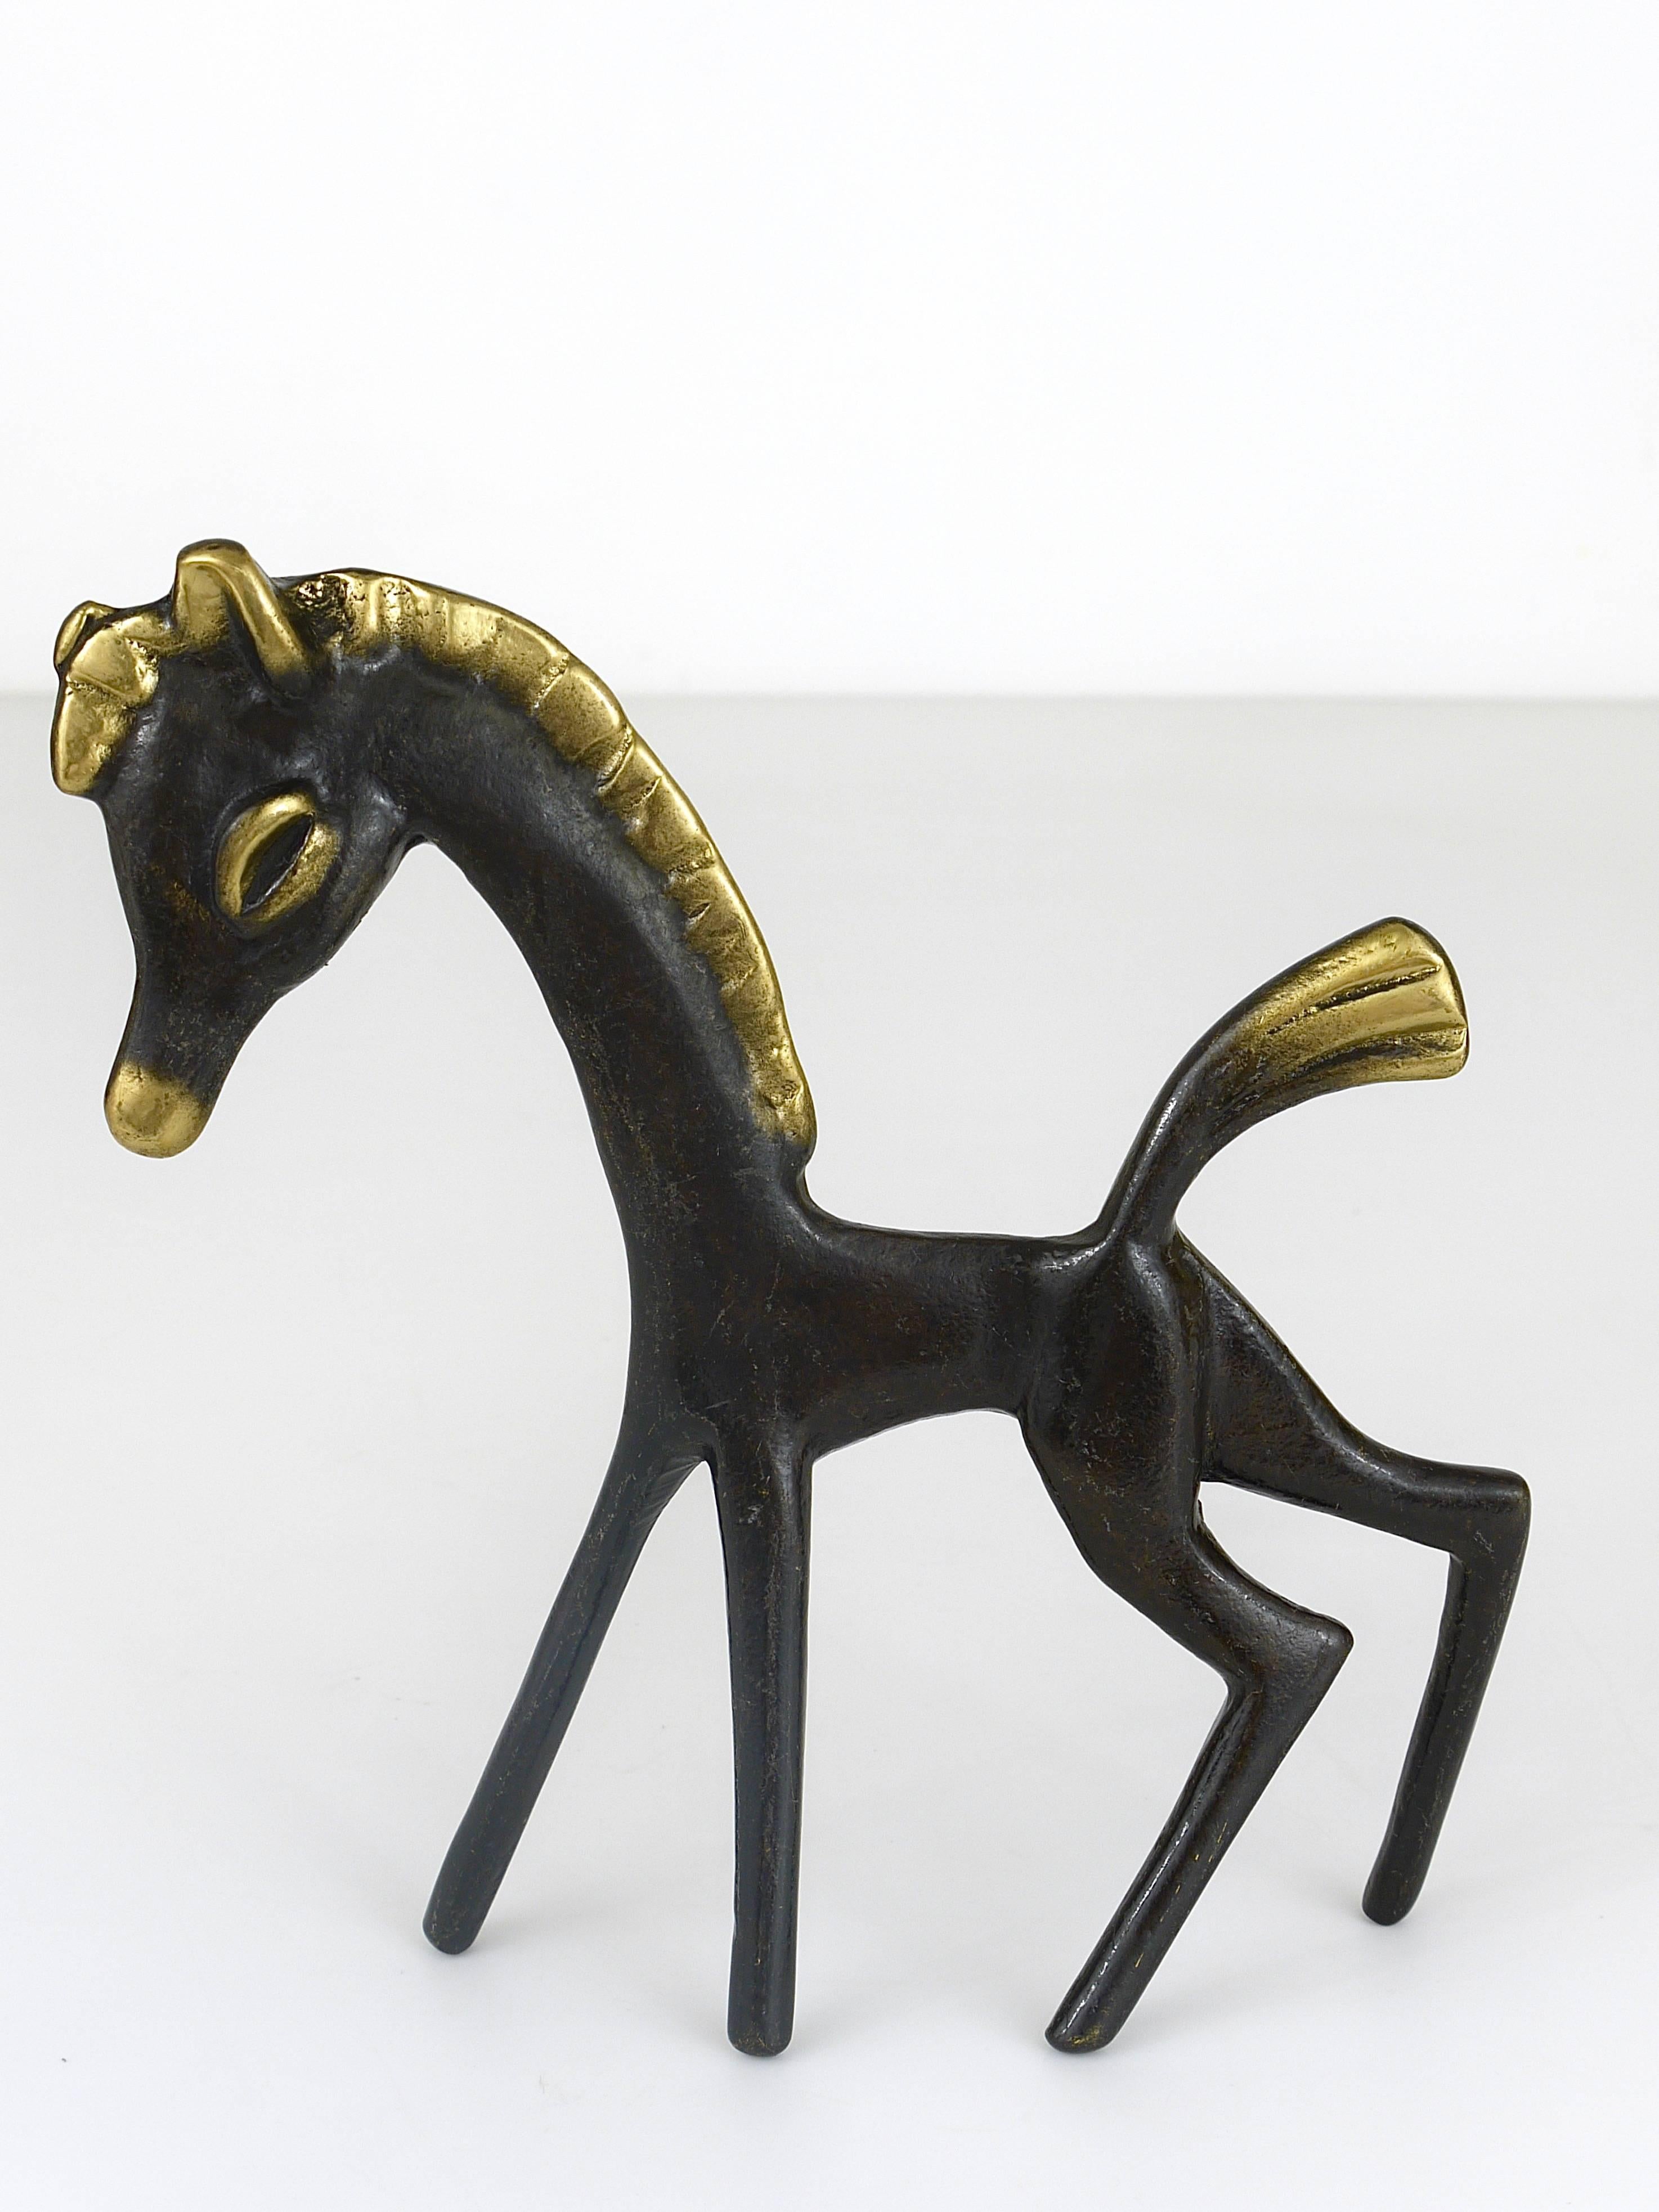 A charming, big and solid Mid-Century horse foal figurine, made of brass. A very humorous design by Walter Bosse, executed by Baller Austria in the 1950s. In excellent condition. We offer more Walter Bosse brass objects in our other listings.